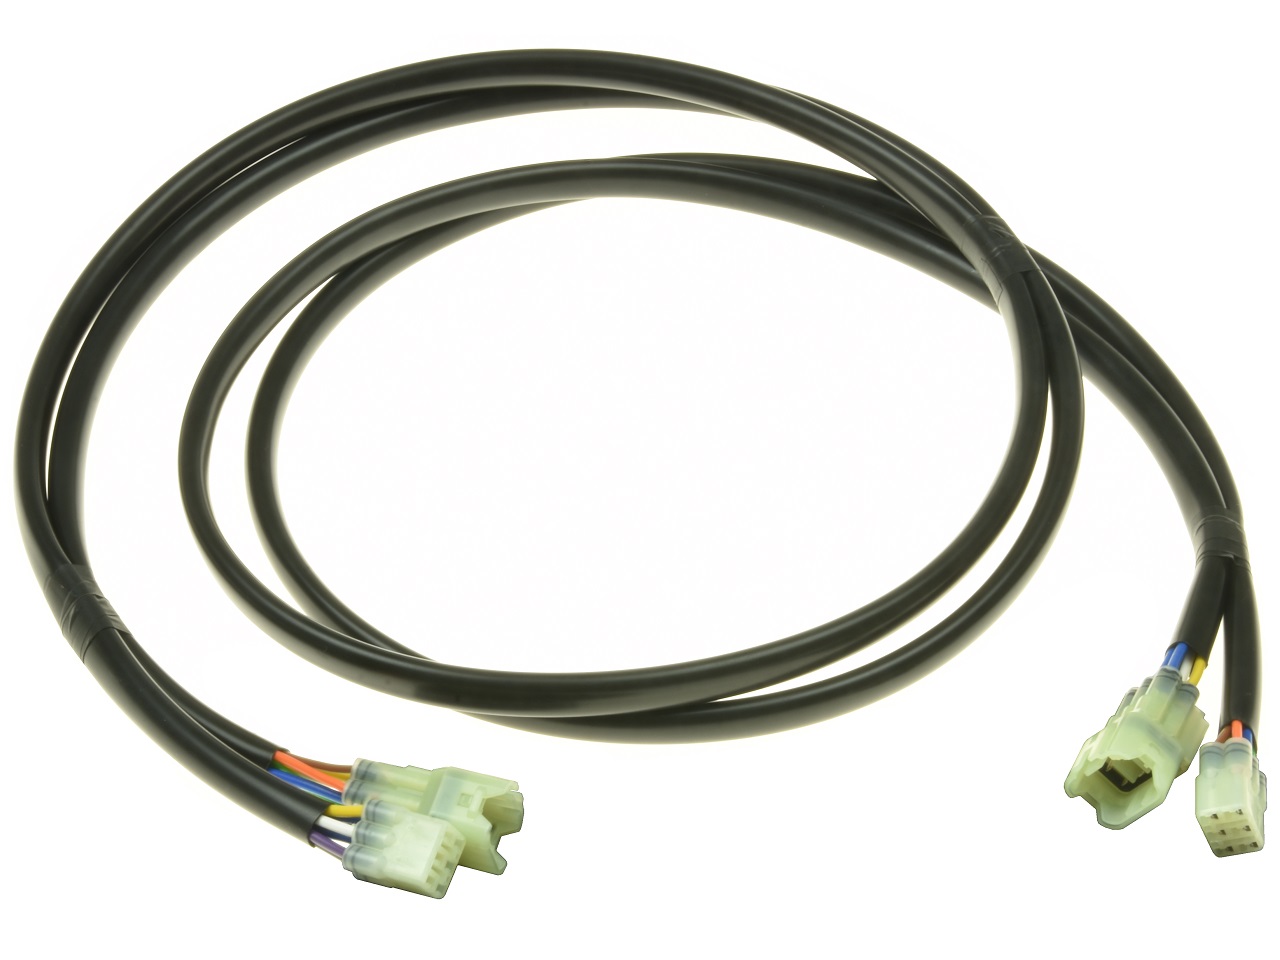 Rotax 912 CDI ignition module unit extension cable, wiring harness 966-726 - Click Image to Close